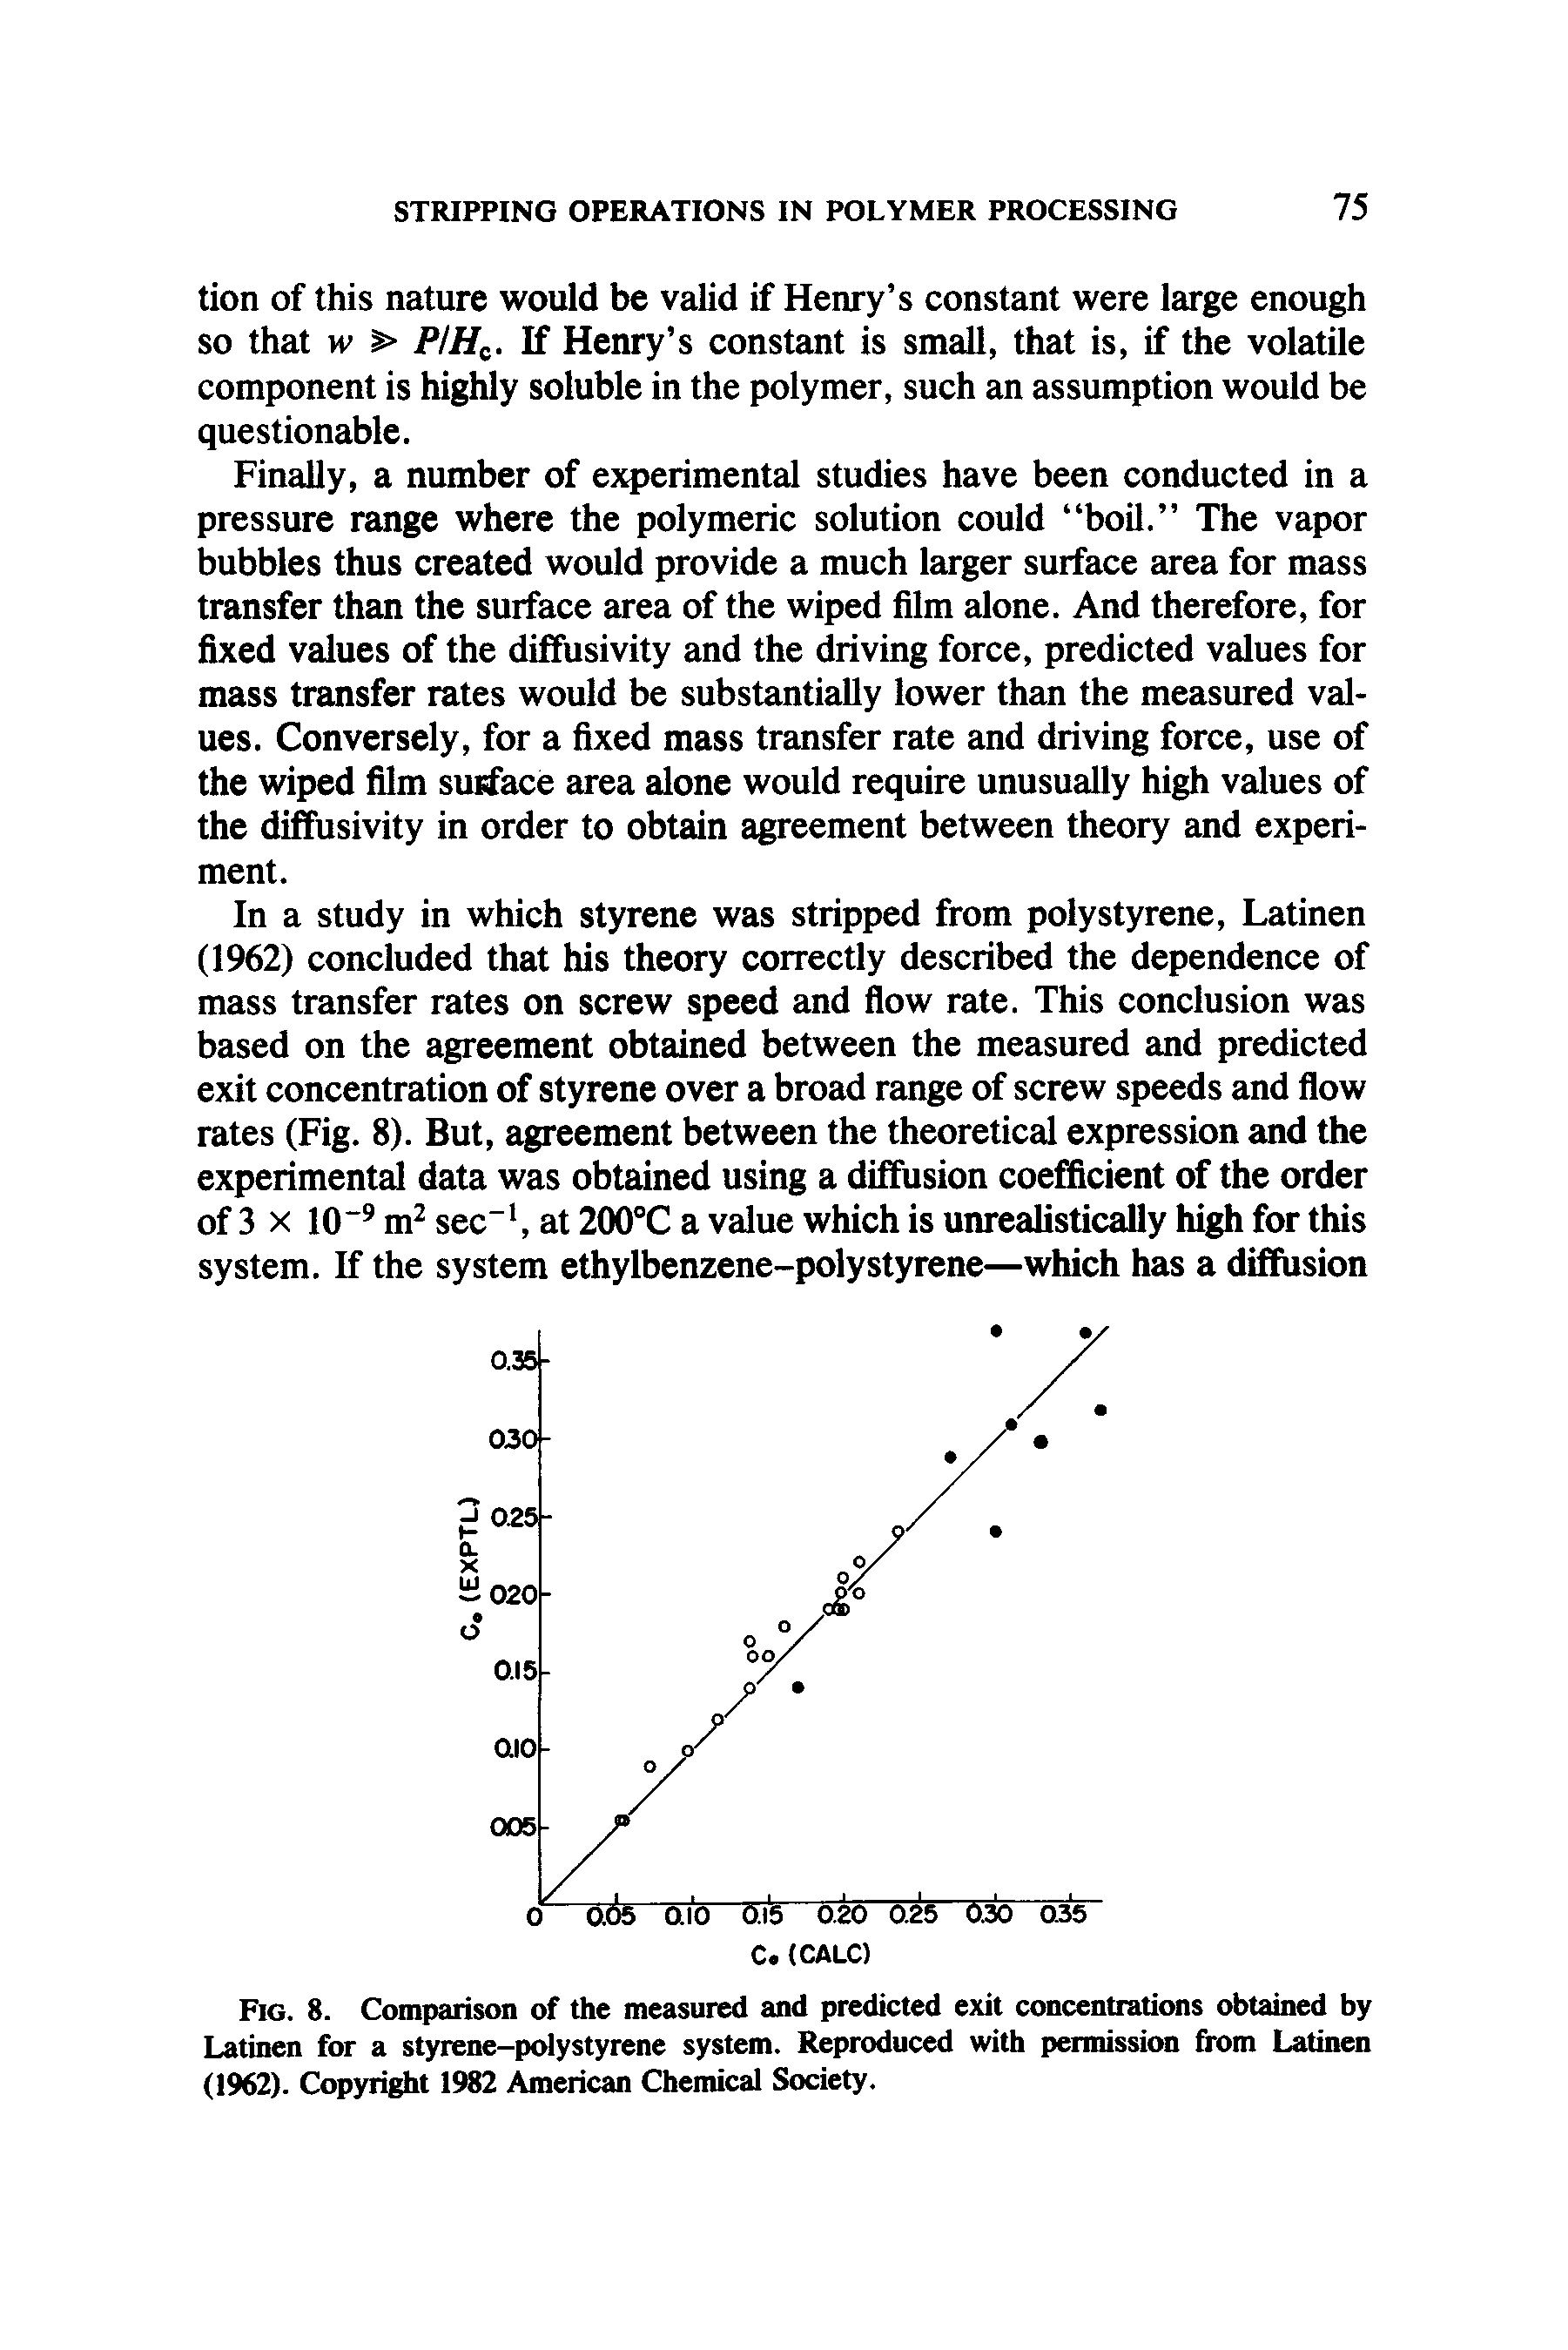 Fig. 8. Comparison of the measured and predicted exit concentrations obtained by Latinen for a styrene-polystyrene system. Reproduced with permission from Latinen (1962). Copyright 1982 American Chemical Society.